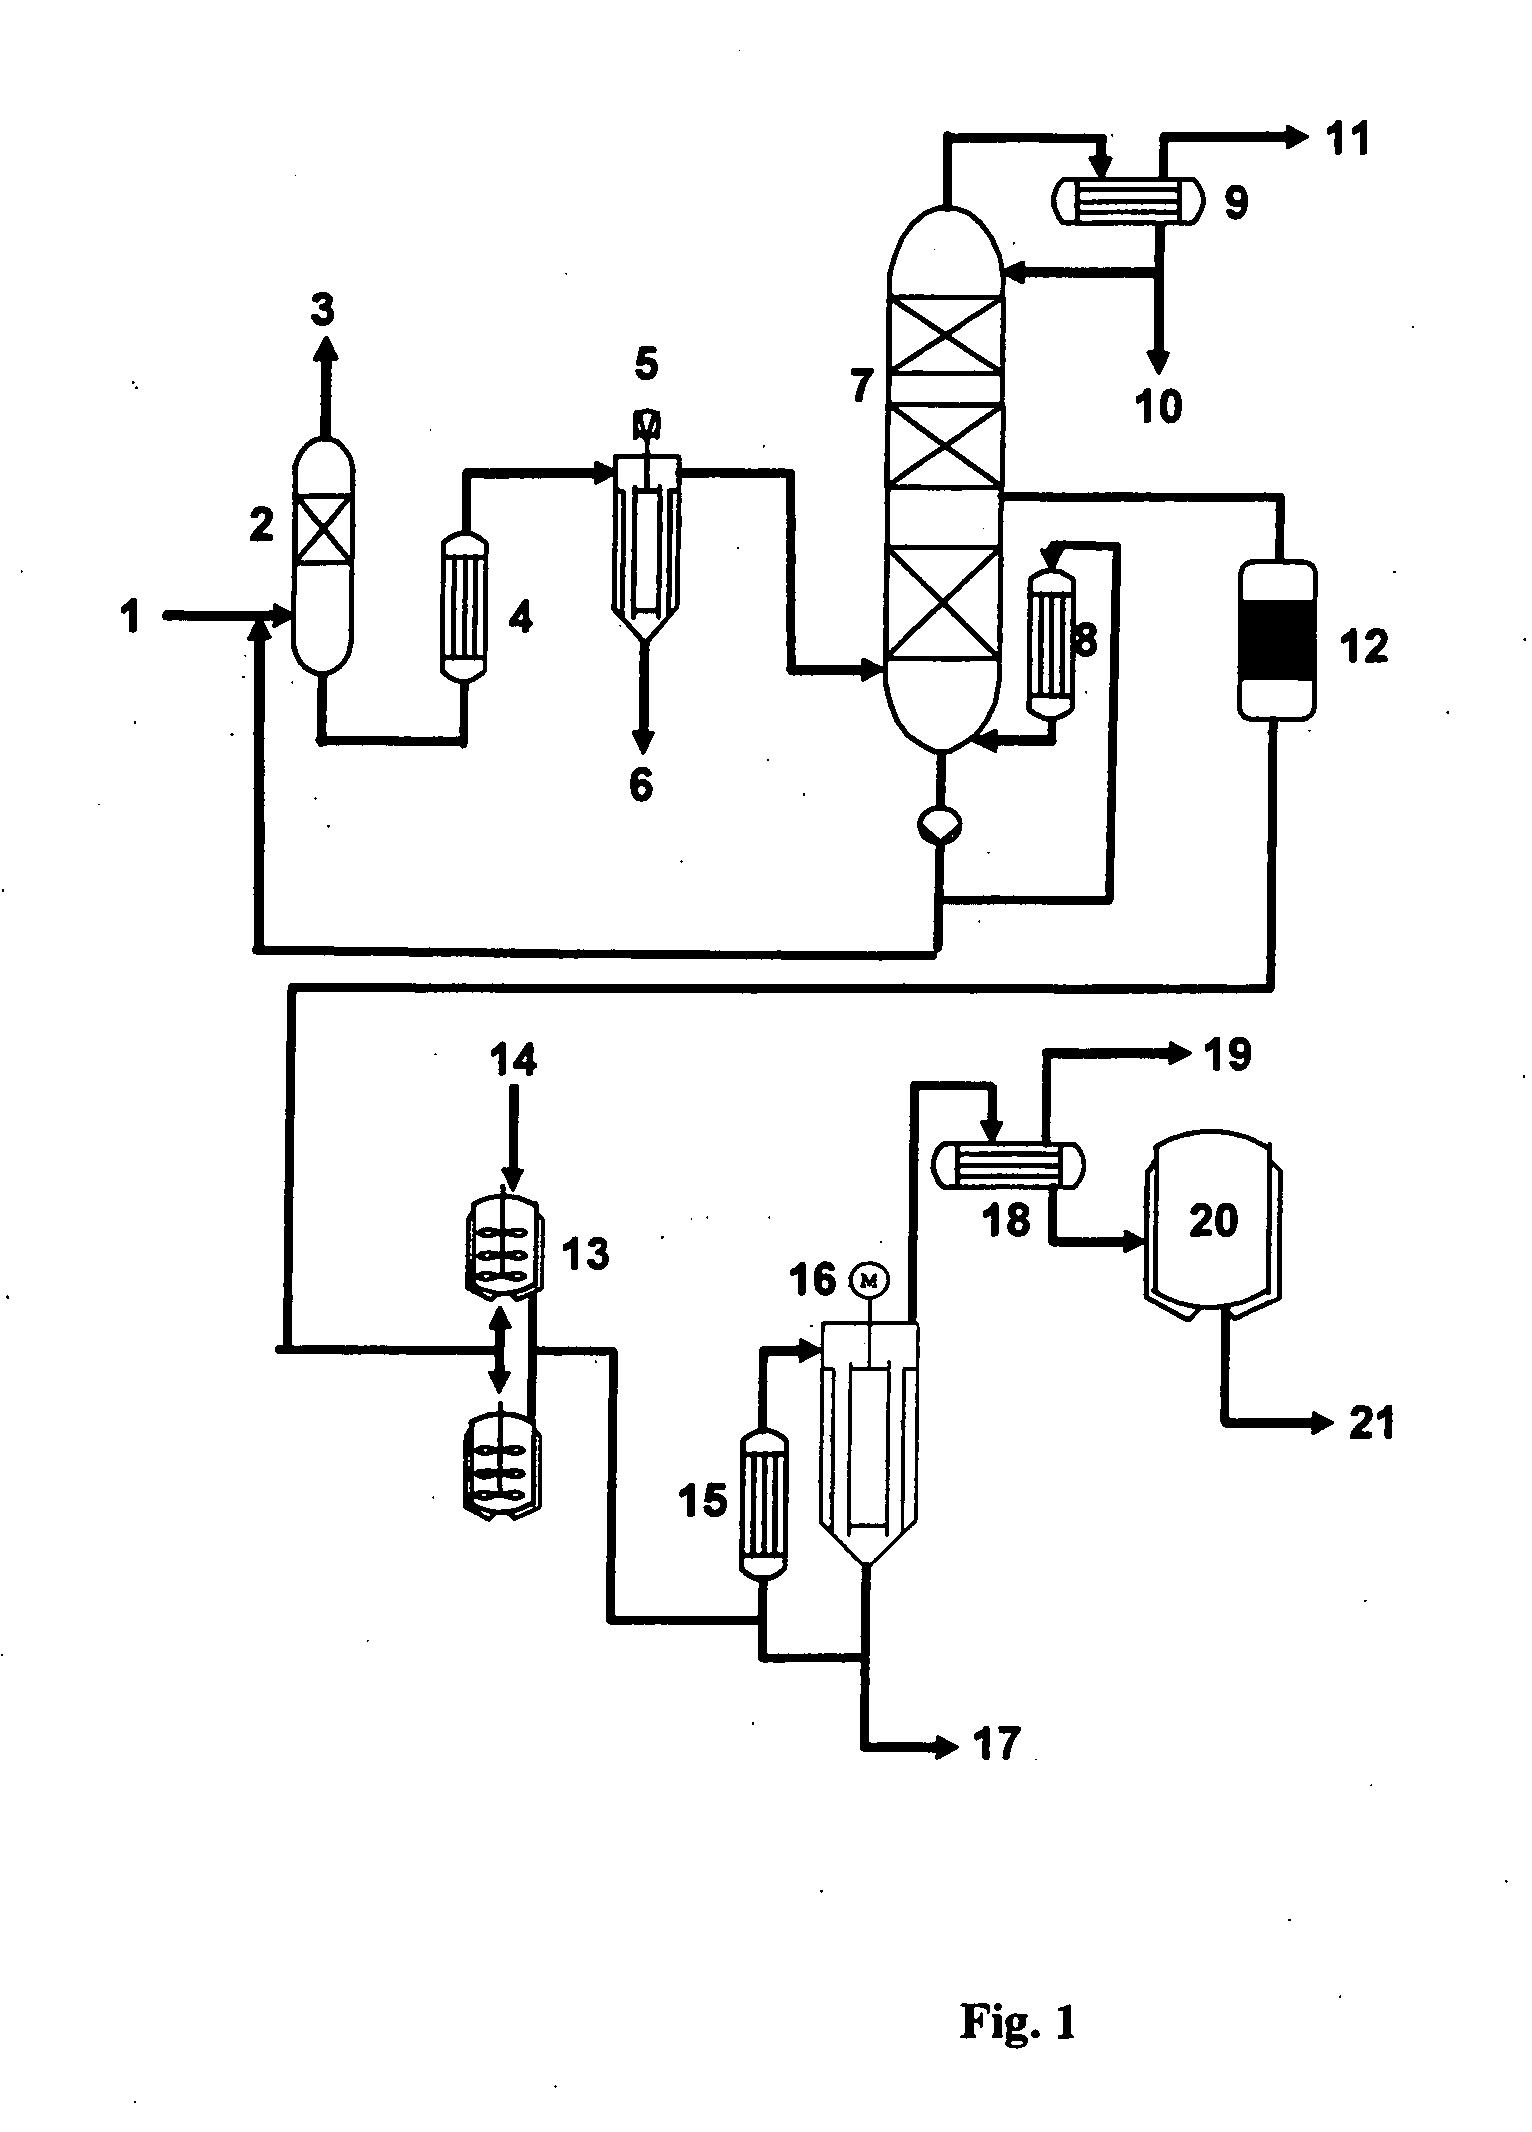 Process for producing glycerol having low aldehyde and ketone content and improved storage stability